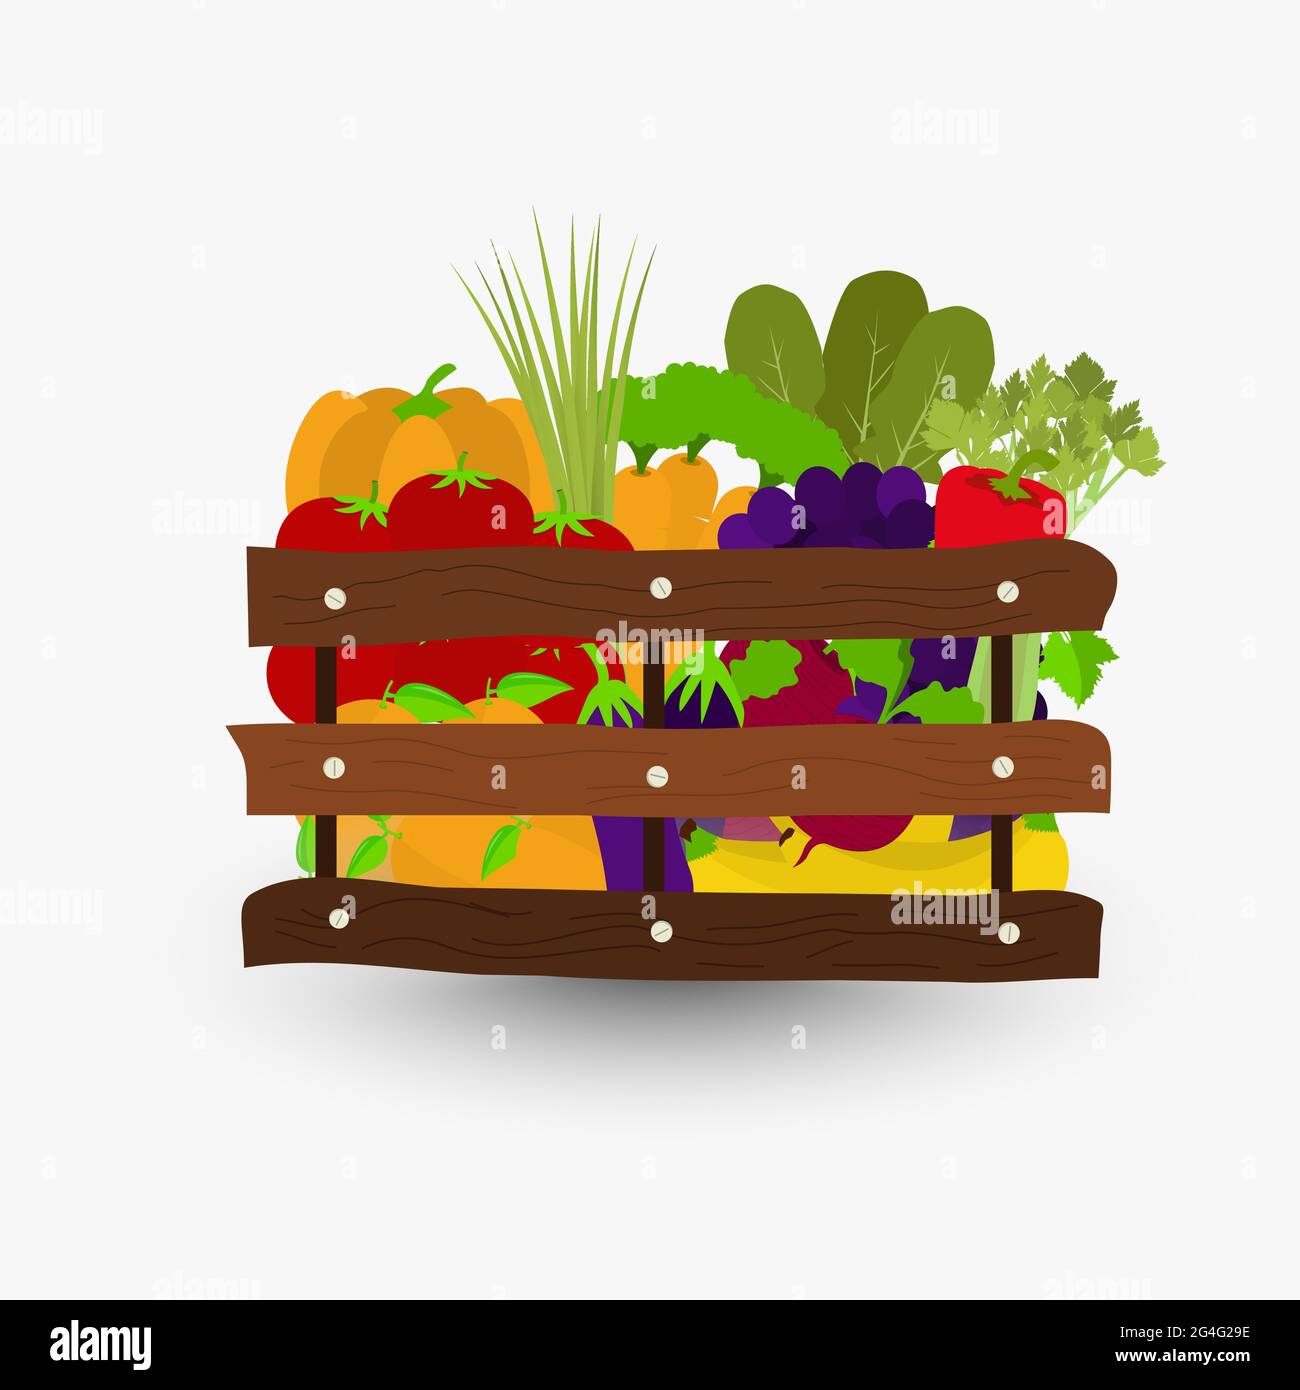 Fruits and vegetables in a wooden crate. Wooden boxes containing tomatoes, oranges, grapes, carrots, bananas, eggplant, beets, green onions, celery, a Stock Vector